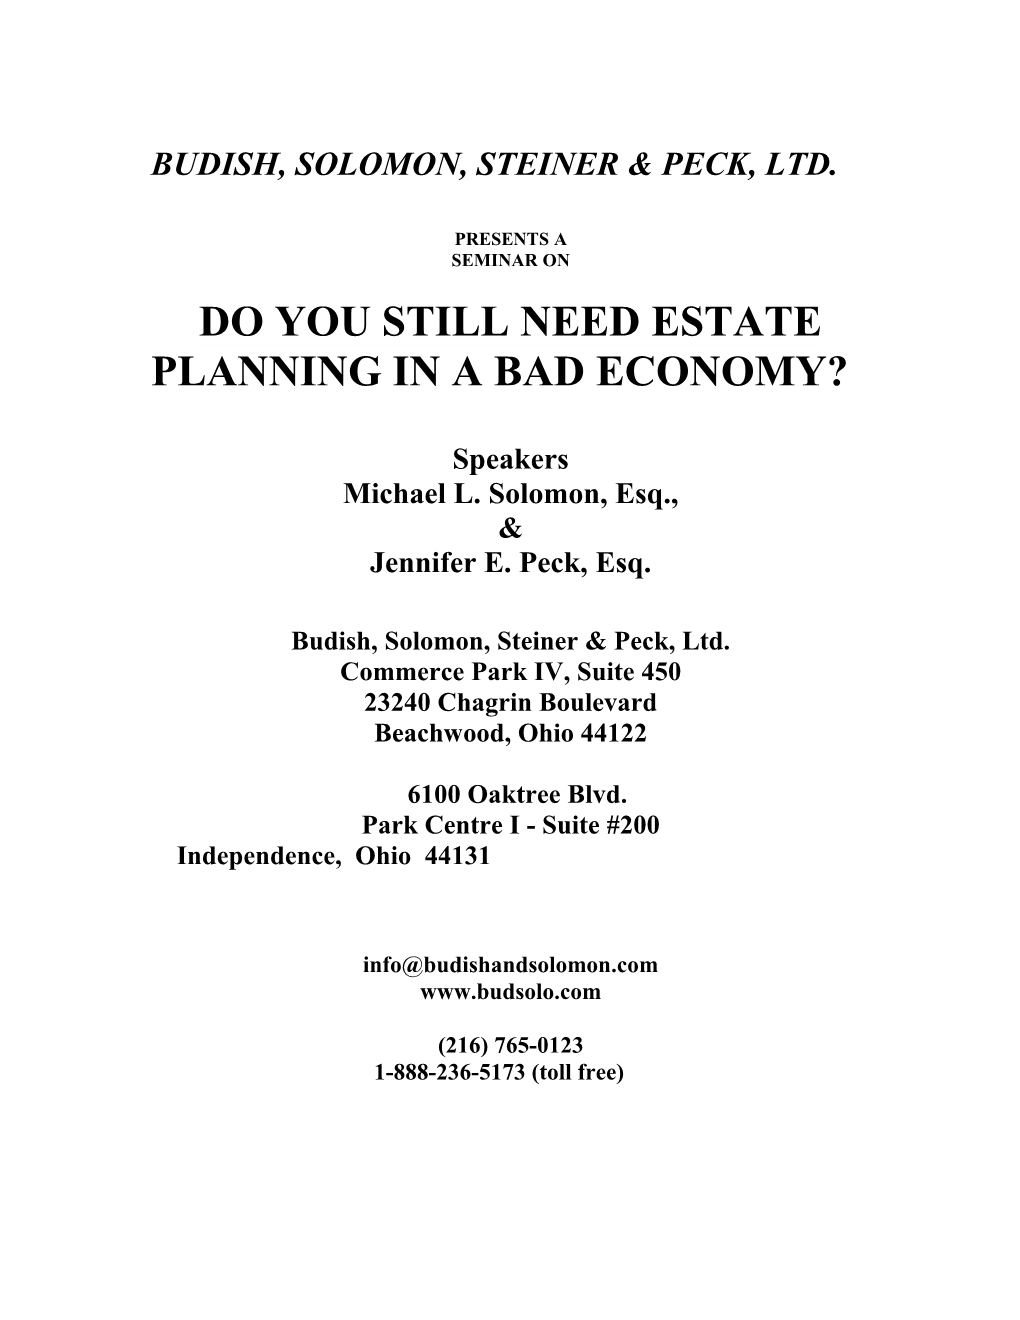 Do You Still Need Estate Planning in a Bad Economy?